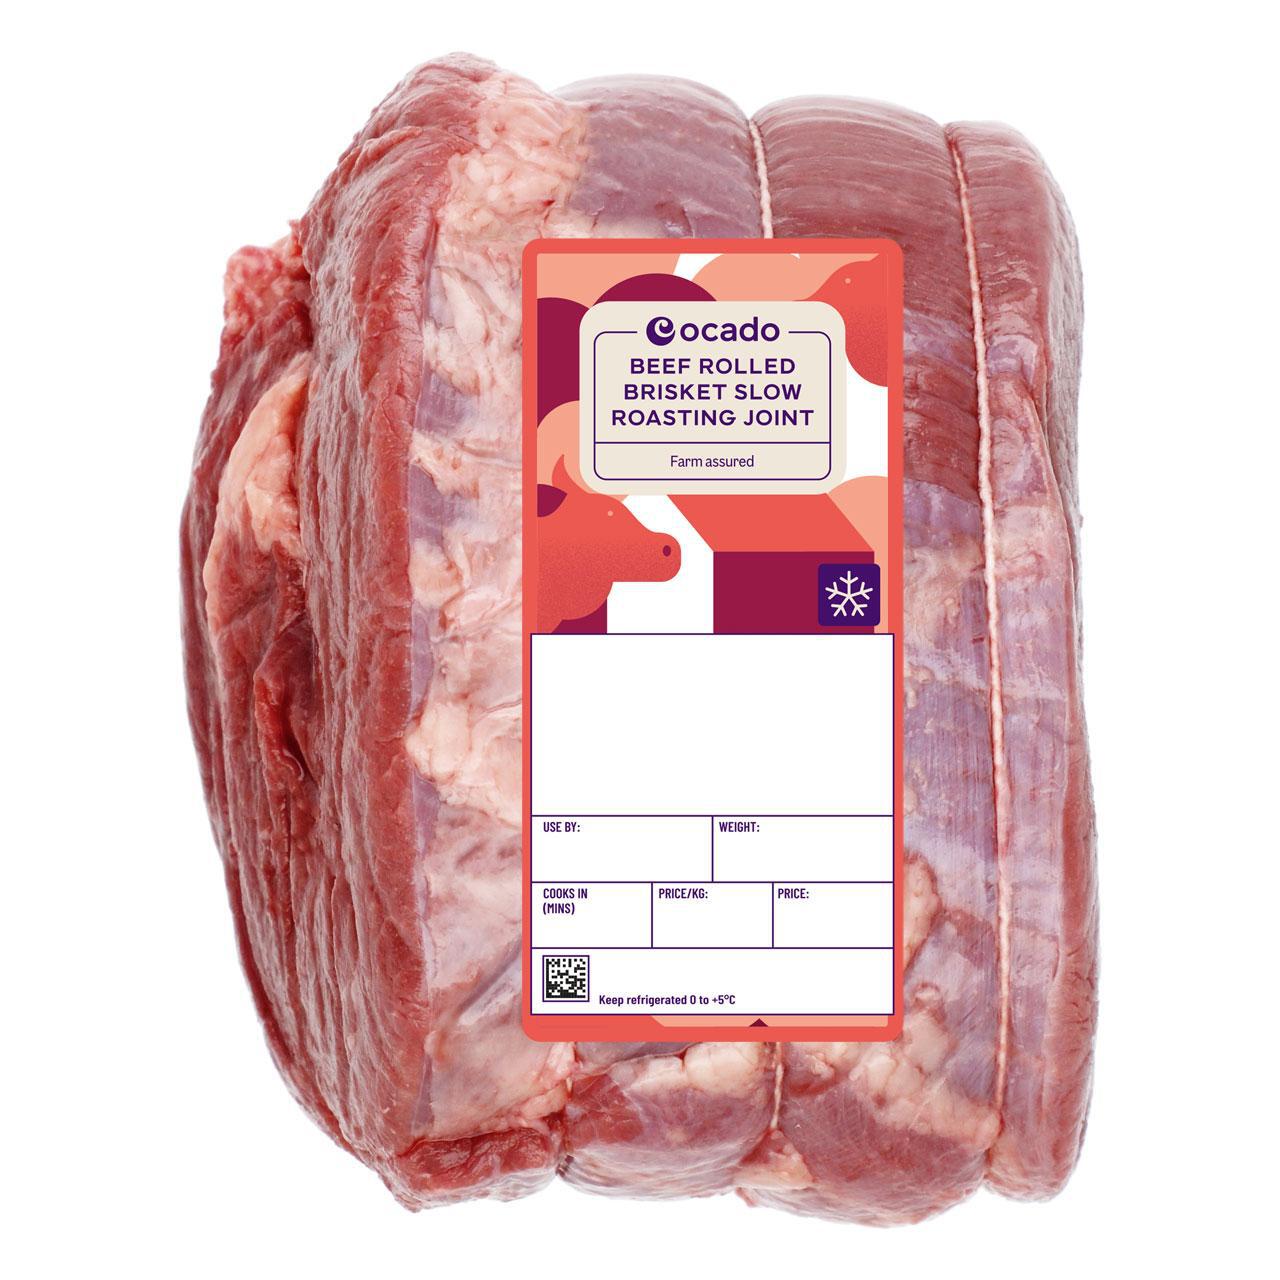 Ocado Beef Rolled Brisket Slow Roasting Joint Typically: 750g